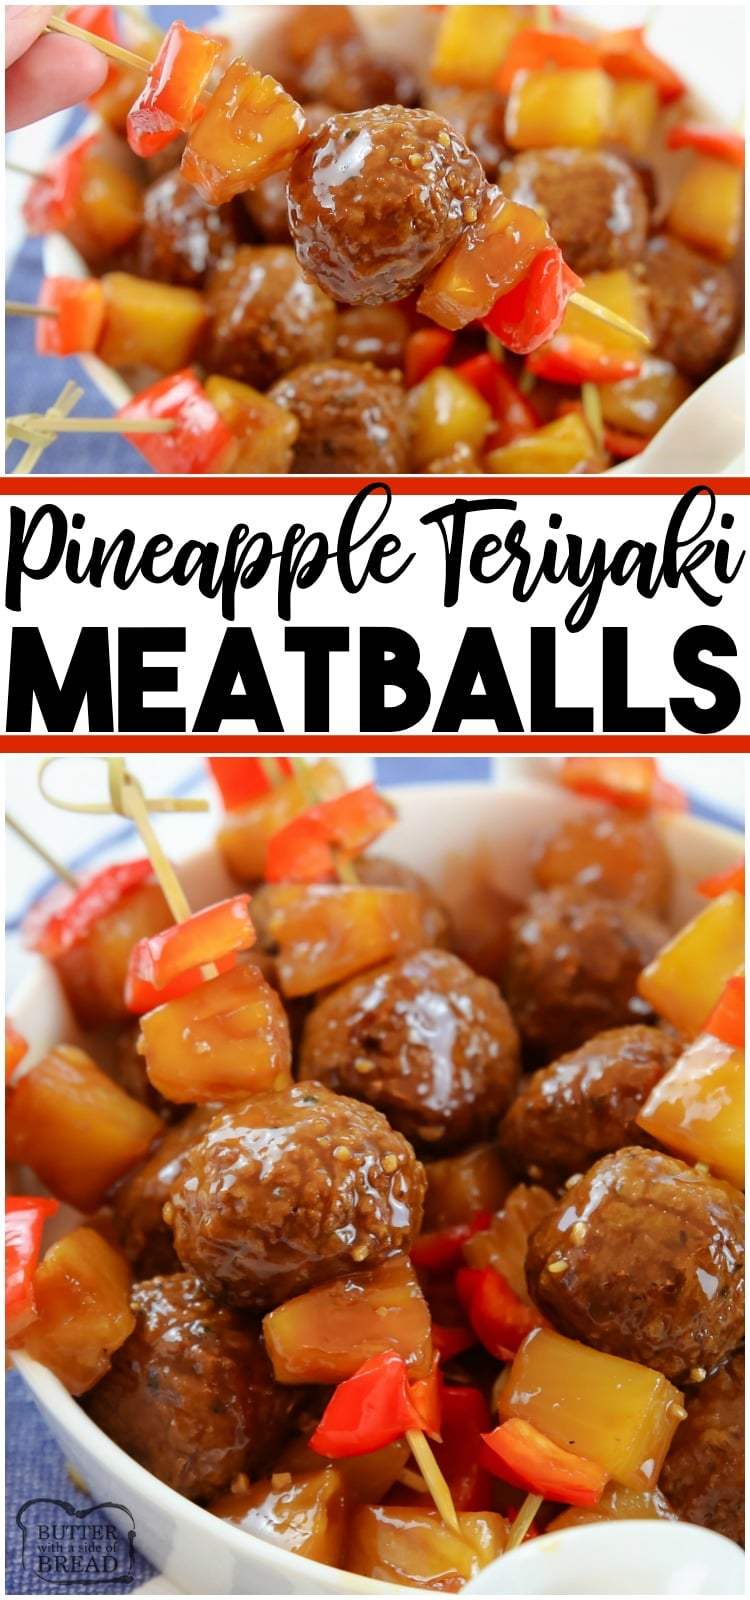 Teriyaki Meatballs recipe with pineapple that is easy to make and is so flavorful! Served as an easy dinner or appetizer, pineapple teriyaki meatballs are a crowd pleaser every time! #pineapple #teriyaki #meatballs #appetizer #dinner #recipe #easyrecipe from BUTTER WITH A SIDE OF BREAD